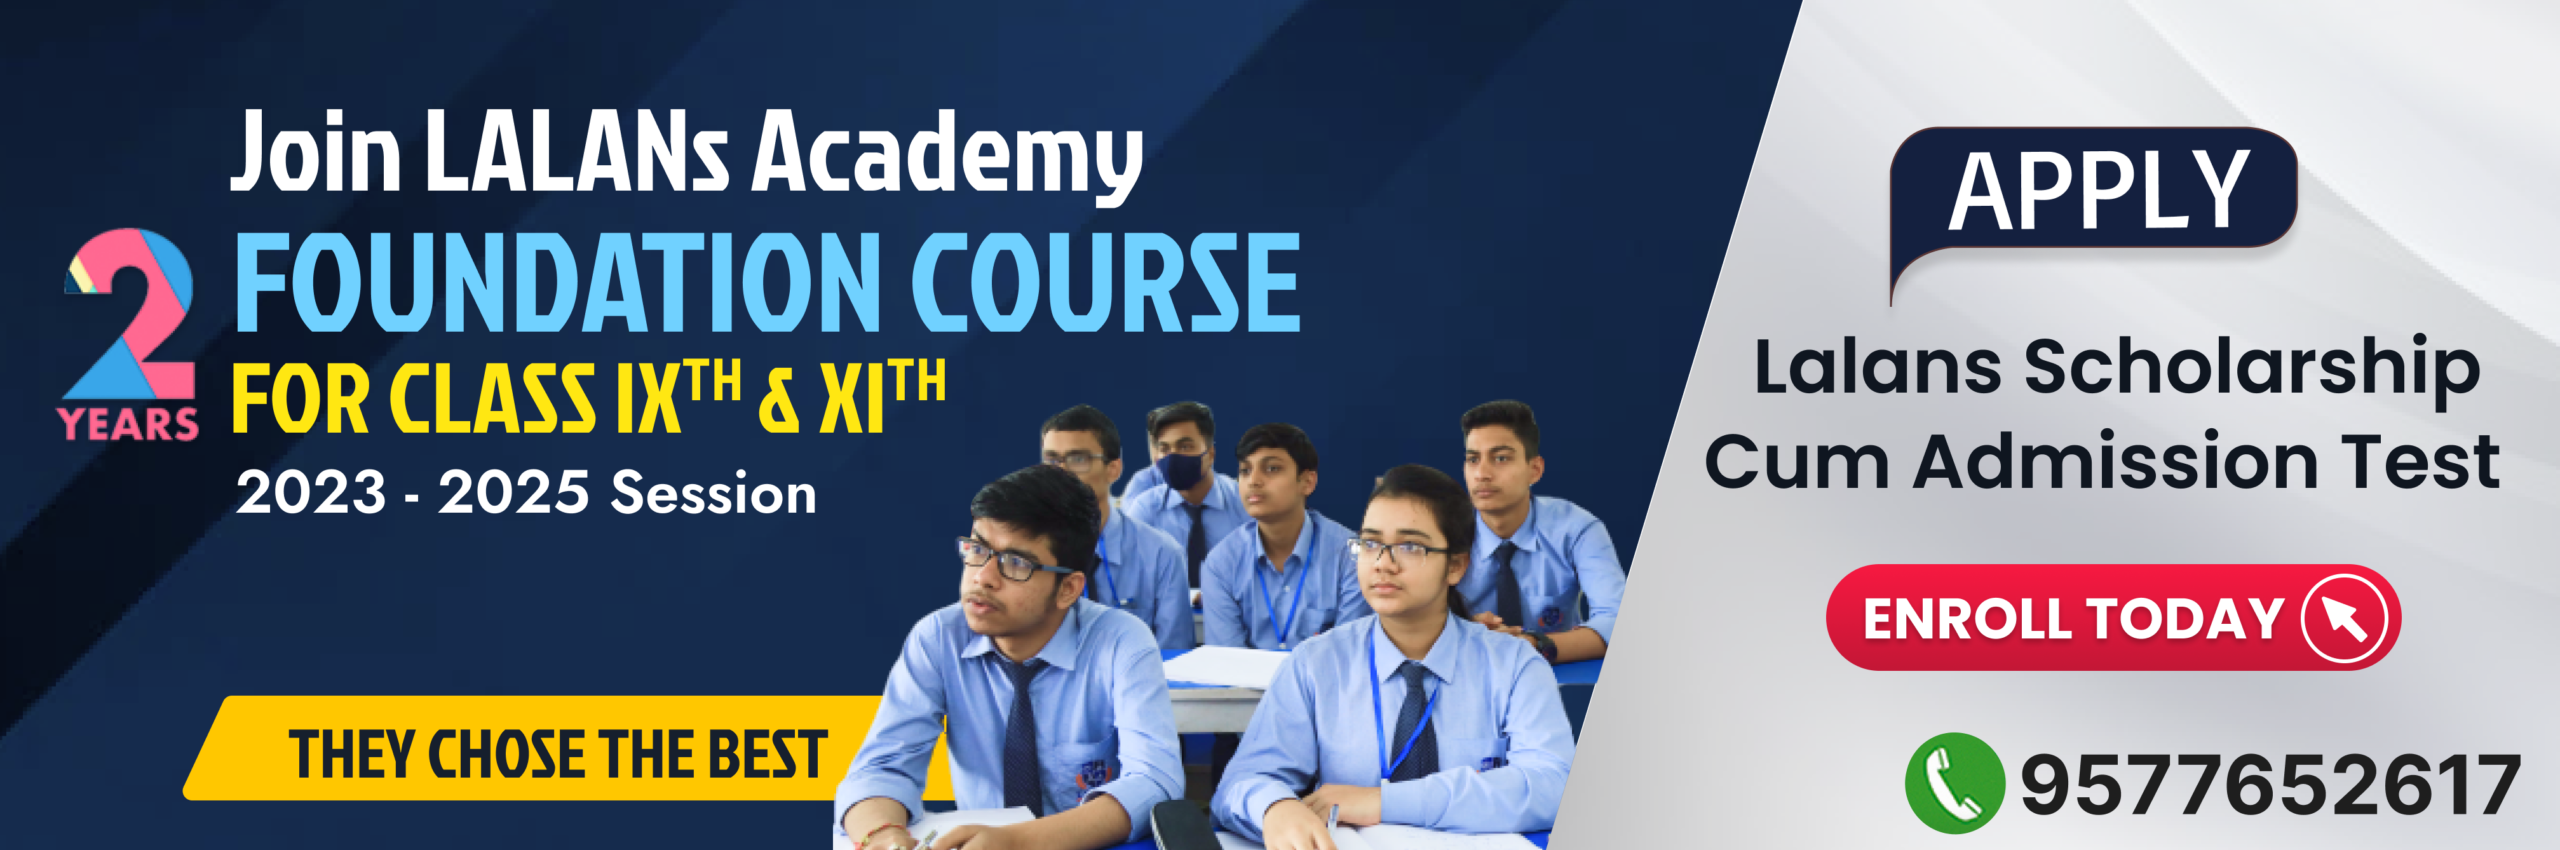 2 year foundation course at lalans integrated academy for class 9th and 11th